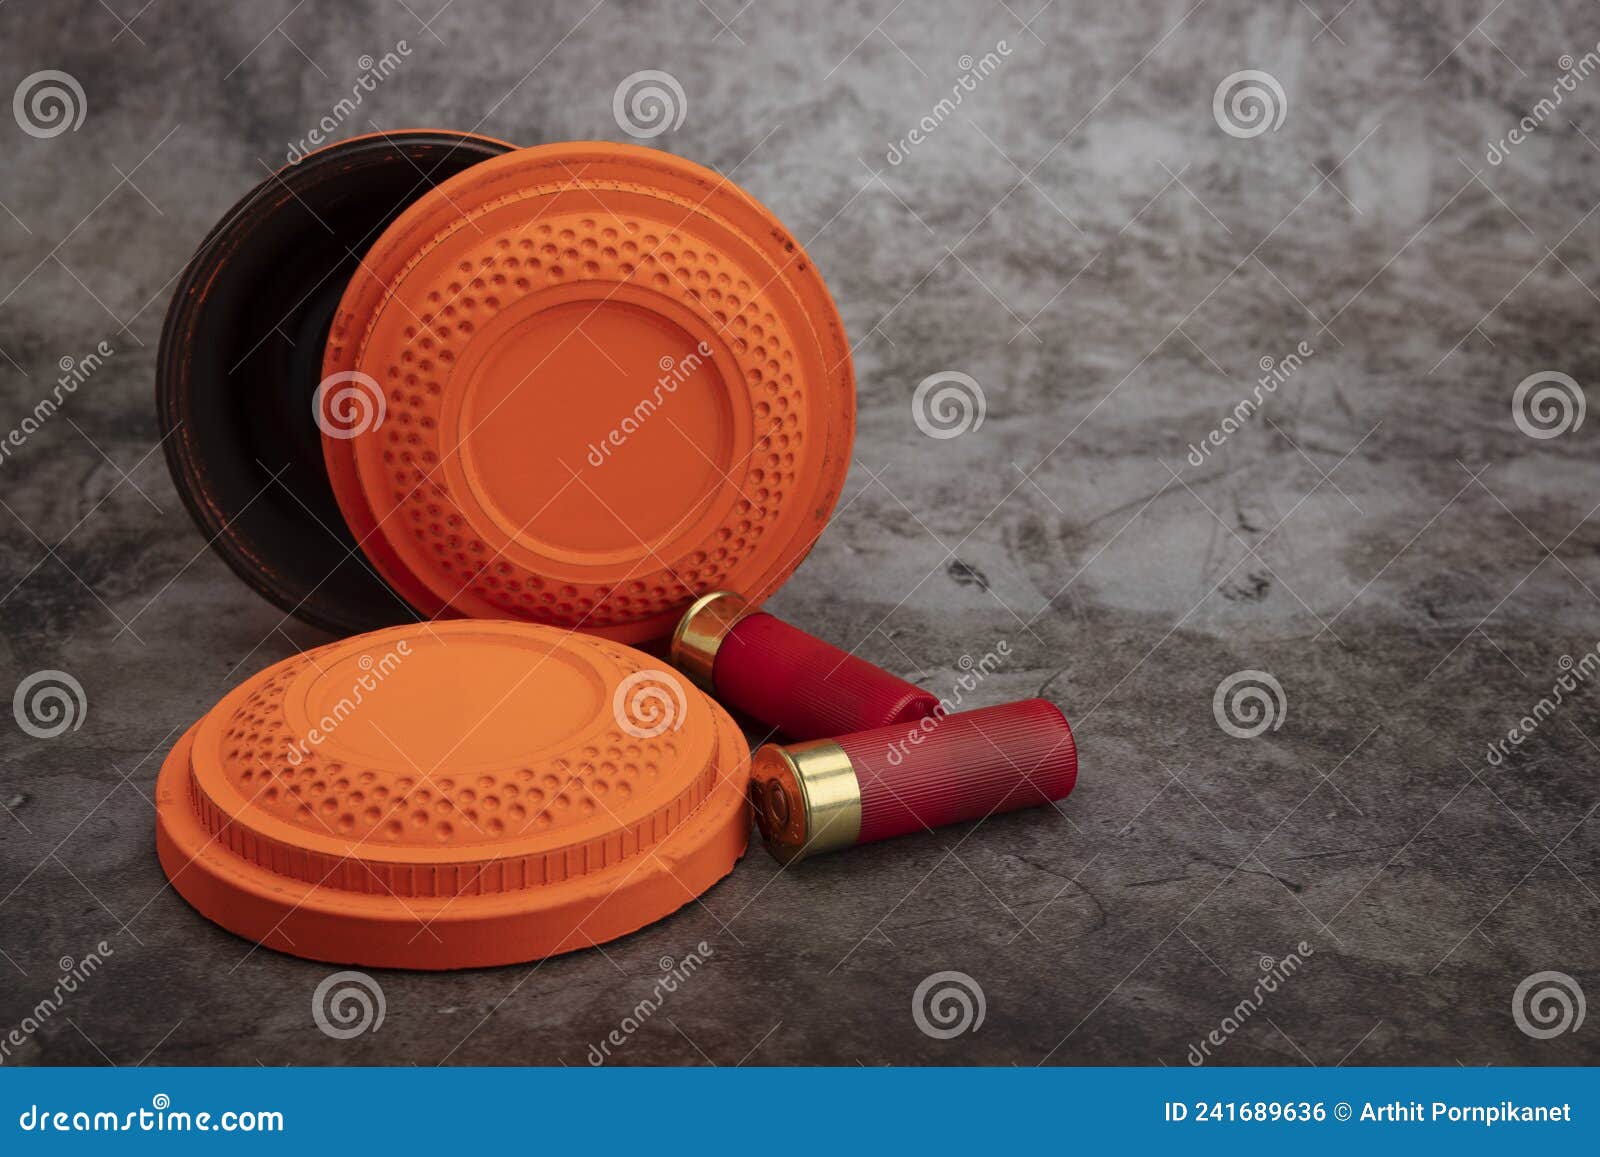 Clay Disc Flying Targets and Shotgun Bullets on Texture Background ,Clay Pigeon Target Game Stock Photo